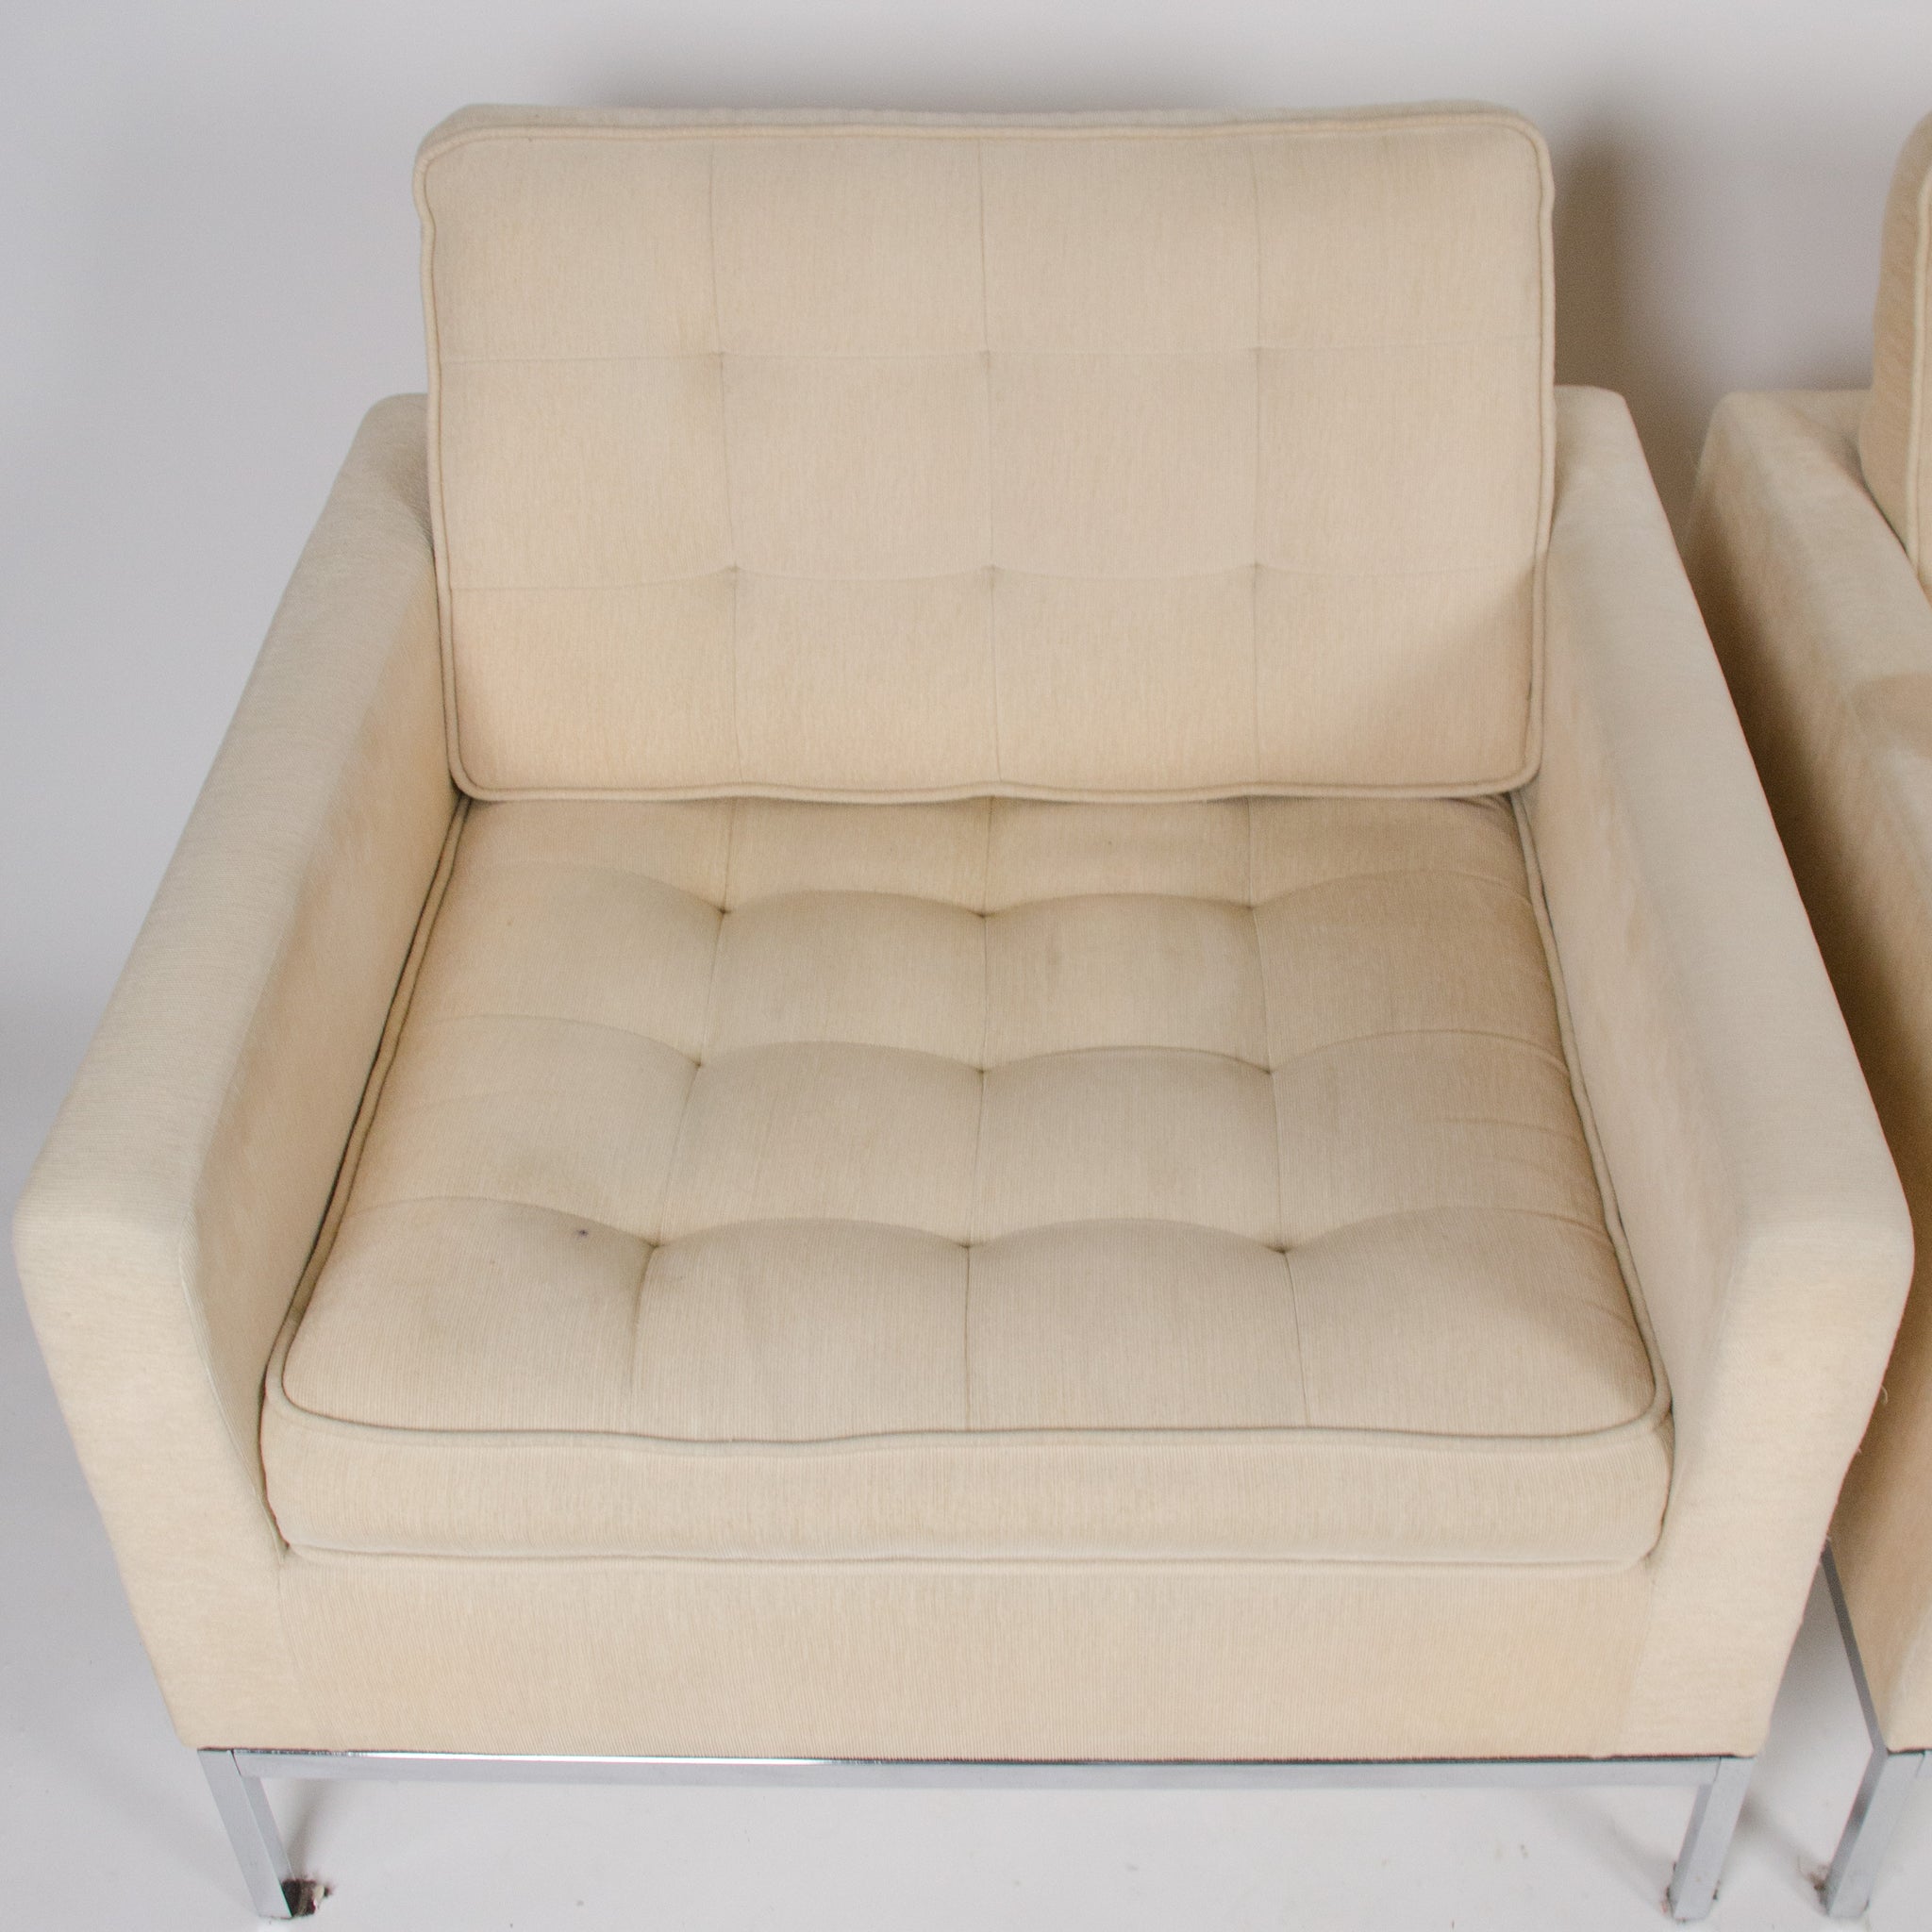 SOLD Matrix International Florence Knoll Lounge Chairs, Fabric, Made In Italy